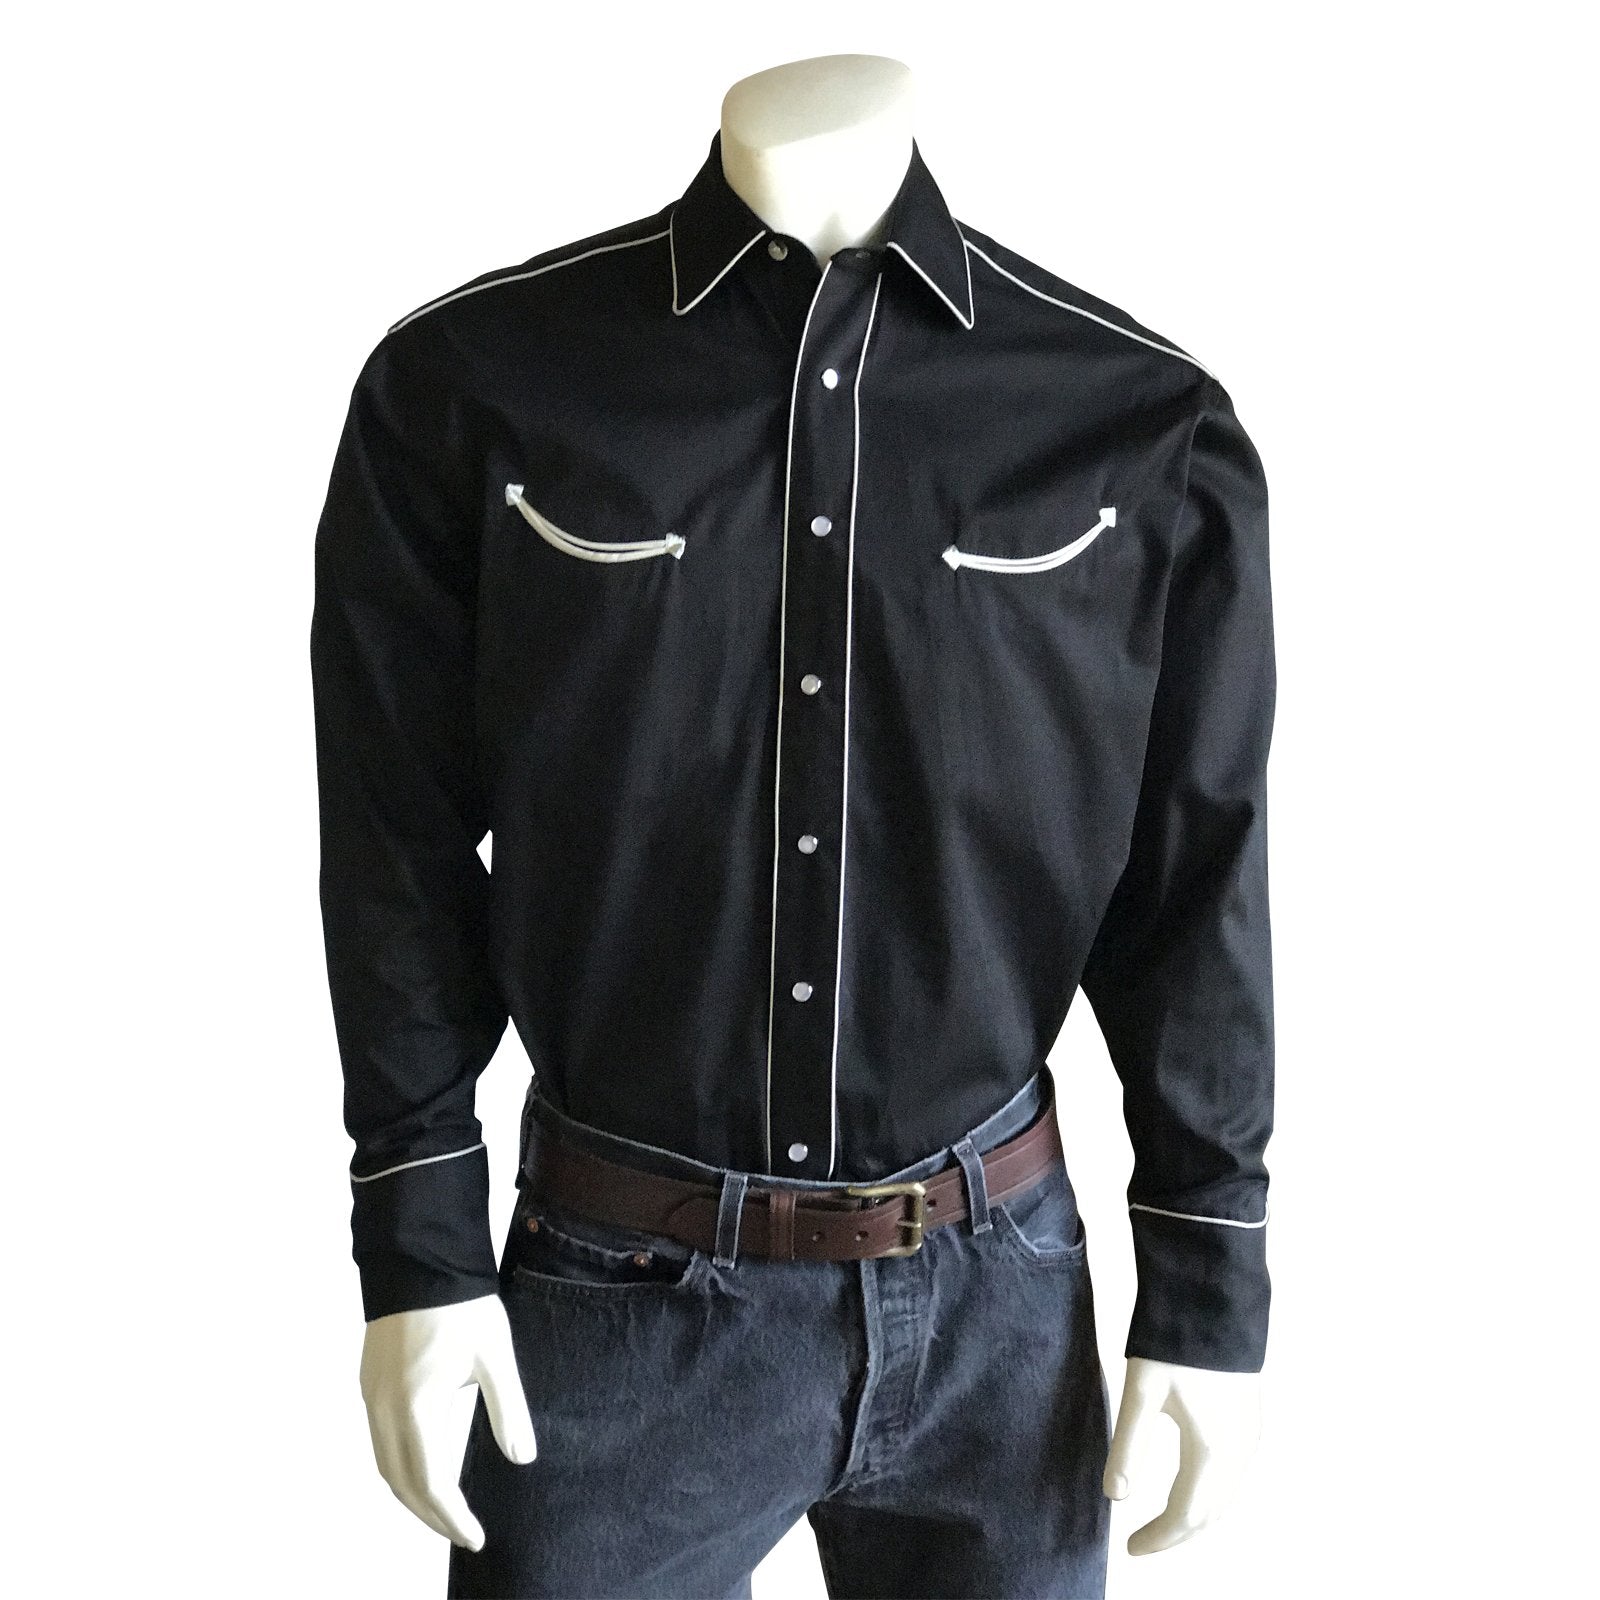 Rockmount Ranch Wear Men's Retro Shirt with Piping Black Front Tucked